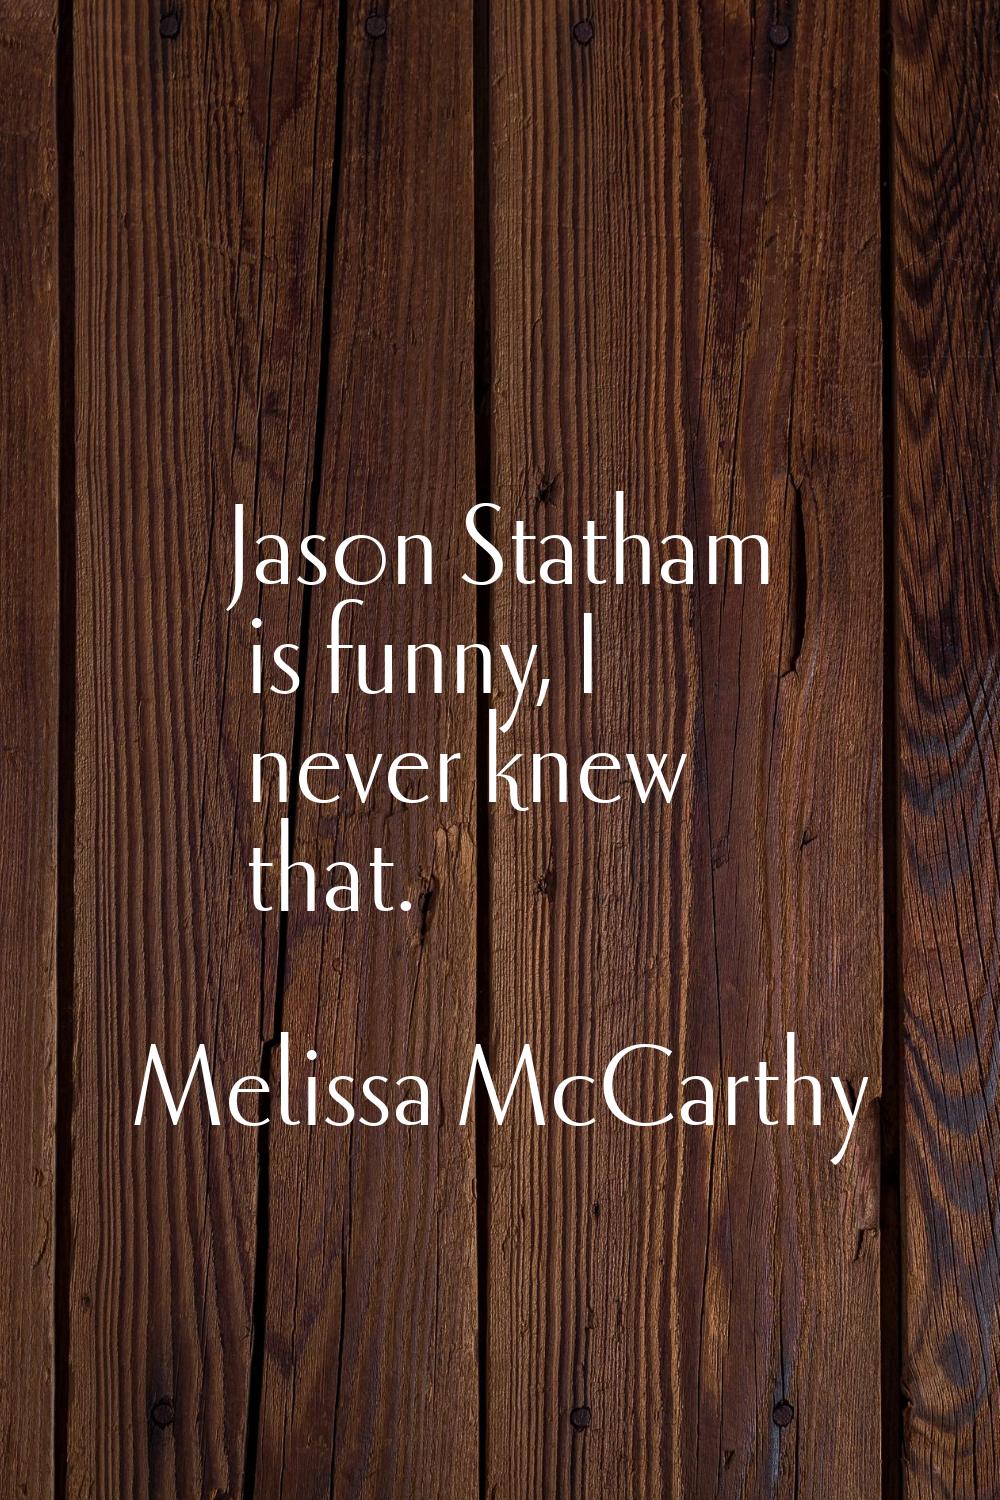 Jason Statham is funny, I never knew that.